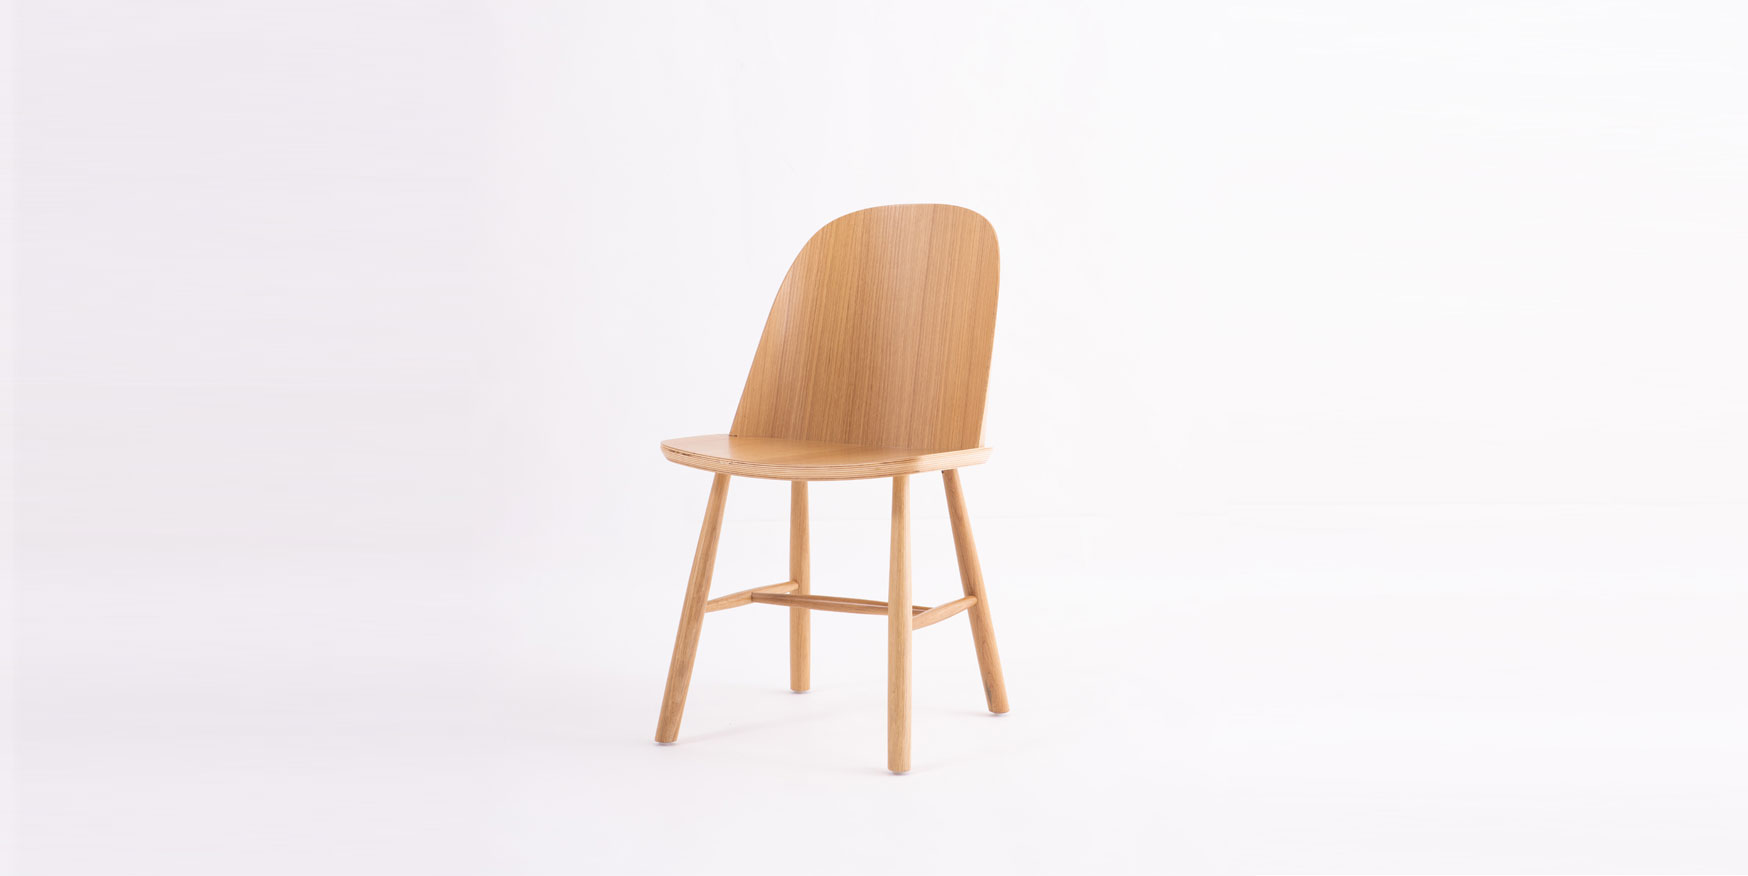 classic wooden dining chairs
